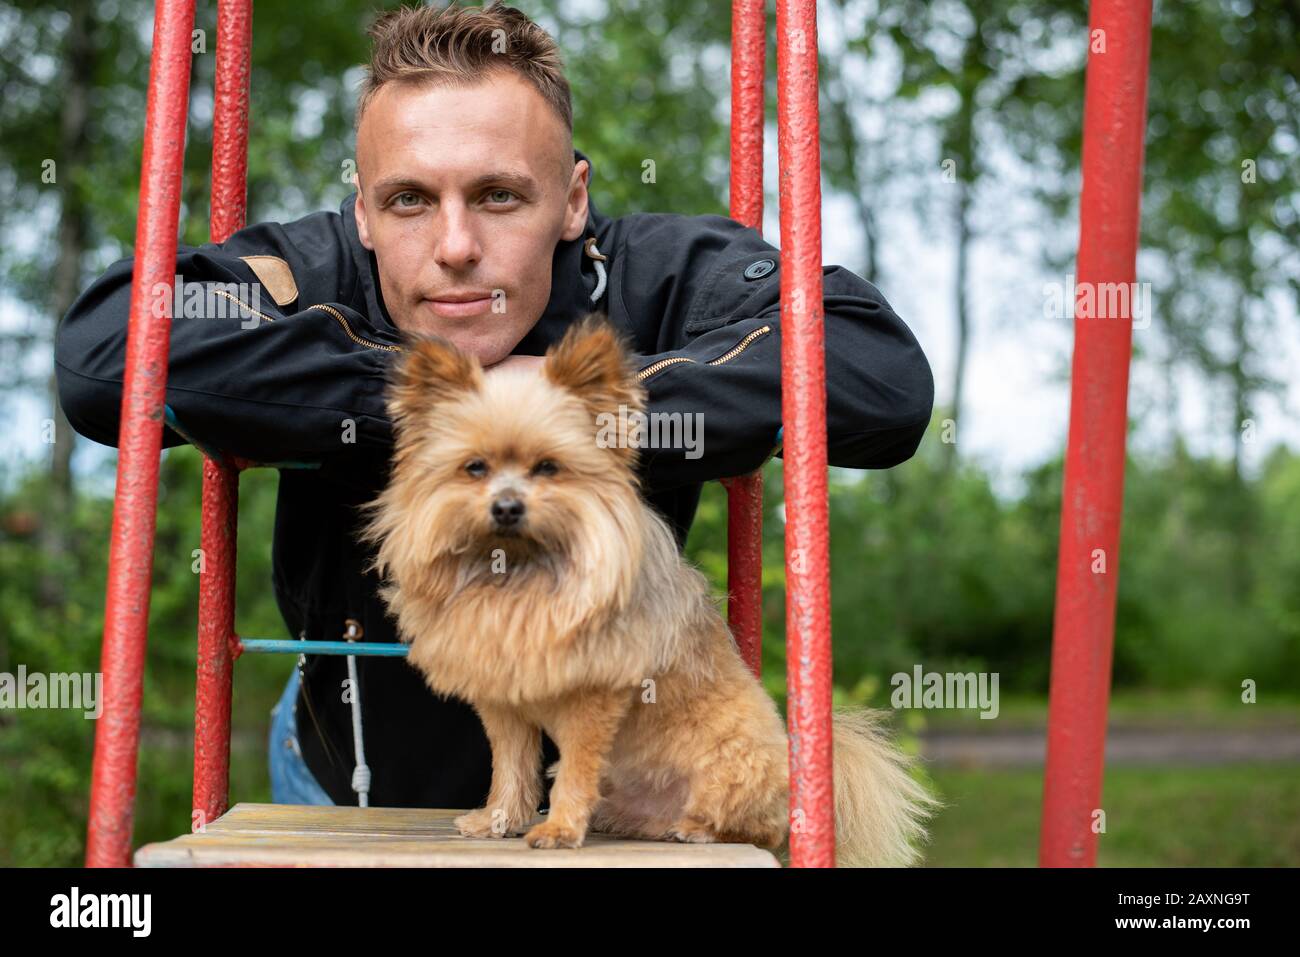 A man with a little dog on a swing. Stock Photo